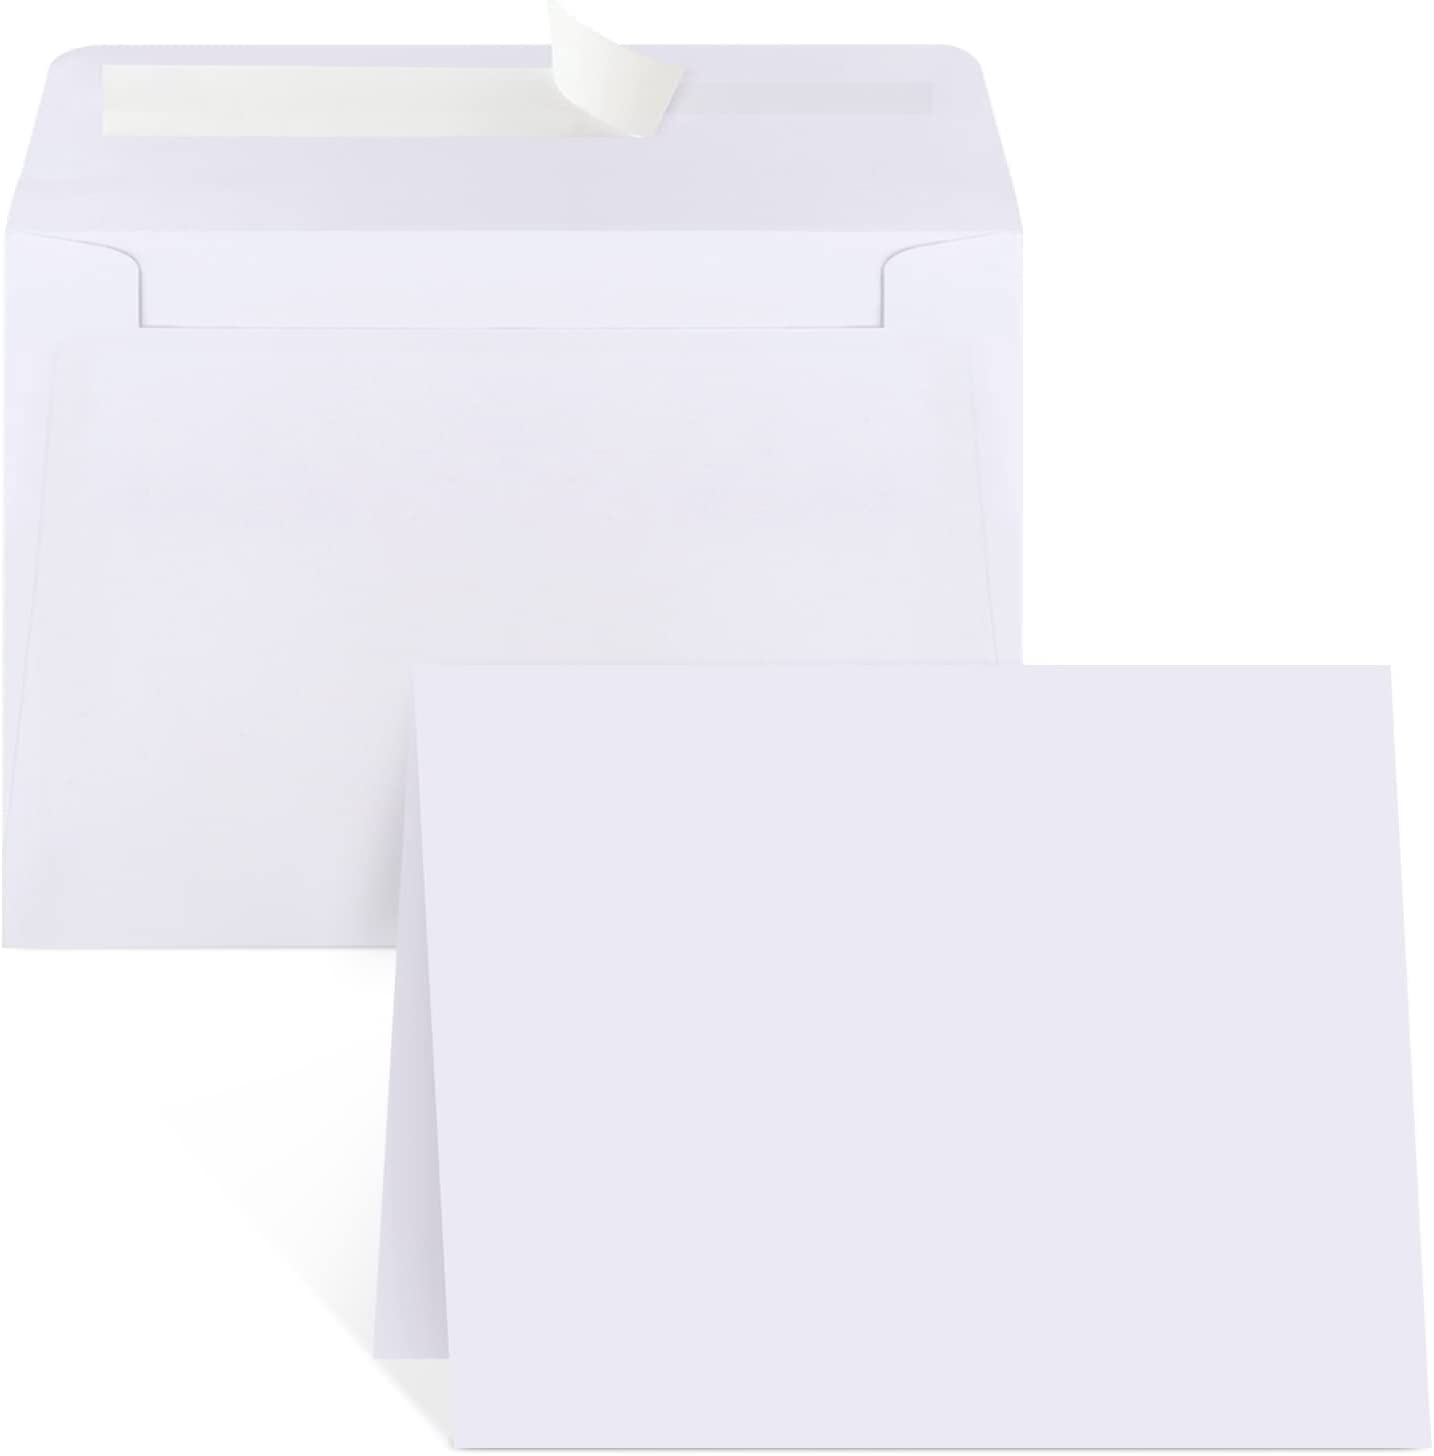 100 Pieces 5 x 7 White Cardstock, Heavyweight Cardstock Sheets Blank  Invitation Paper Greeting Cards Printable, 74lb Cover 200 GSM/White